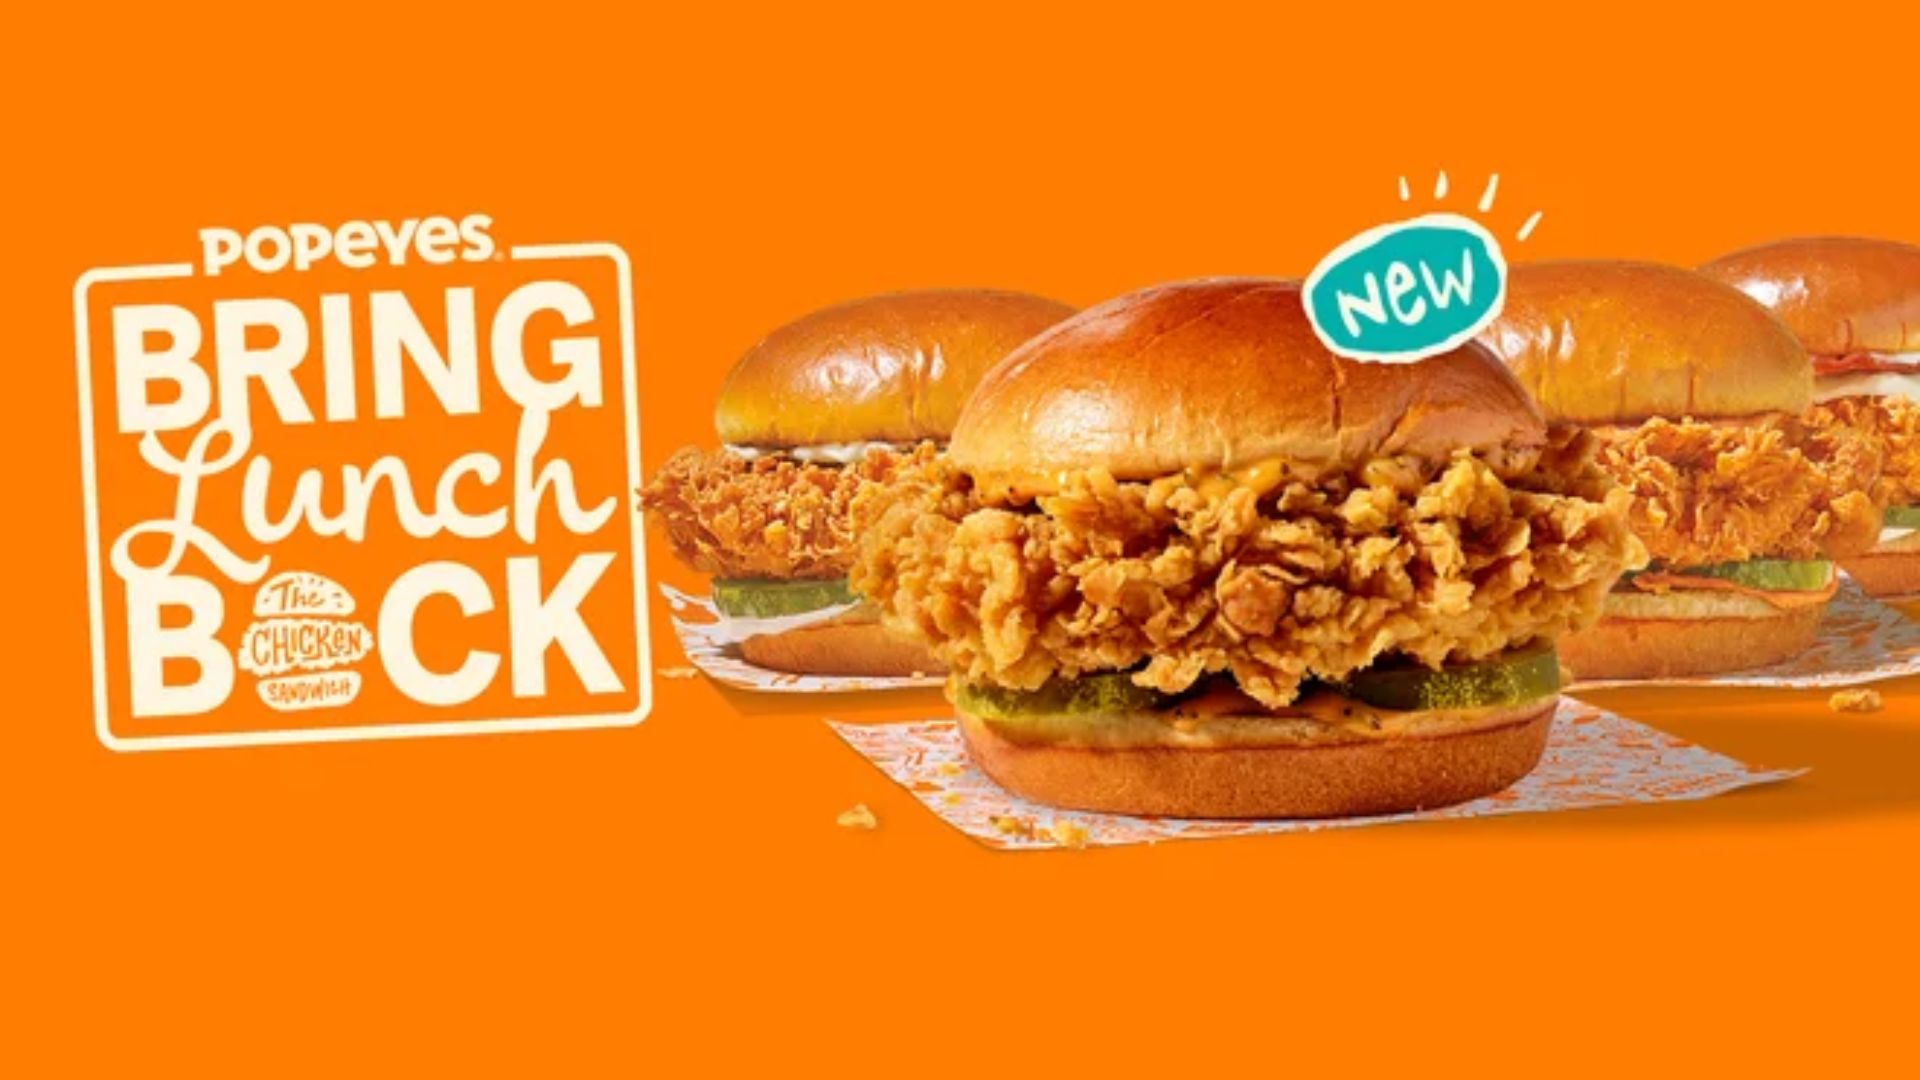 HOW POPEYES IS TAKING LUNCH BACK WITH TV AND TIKTOK CAMPAIGN